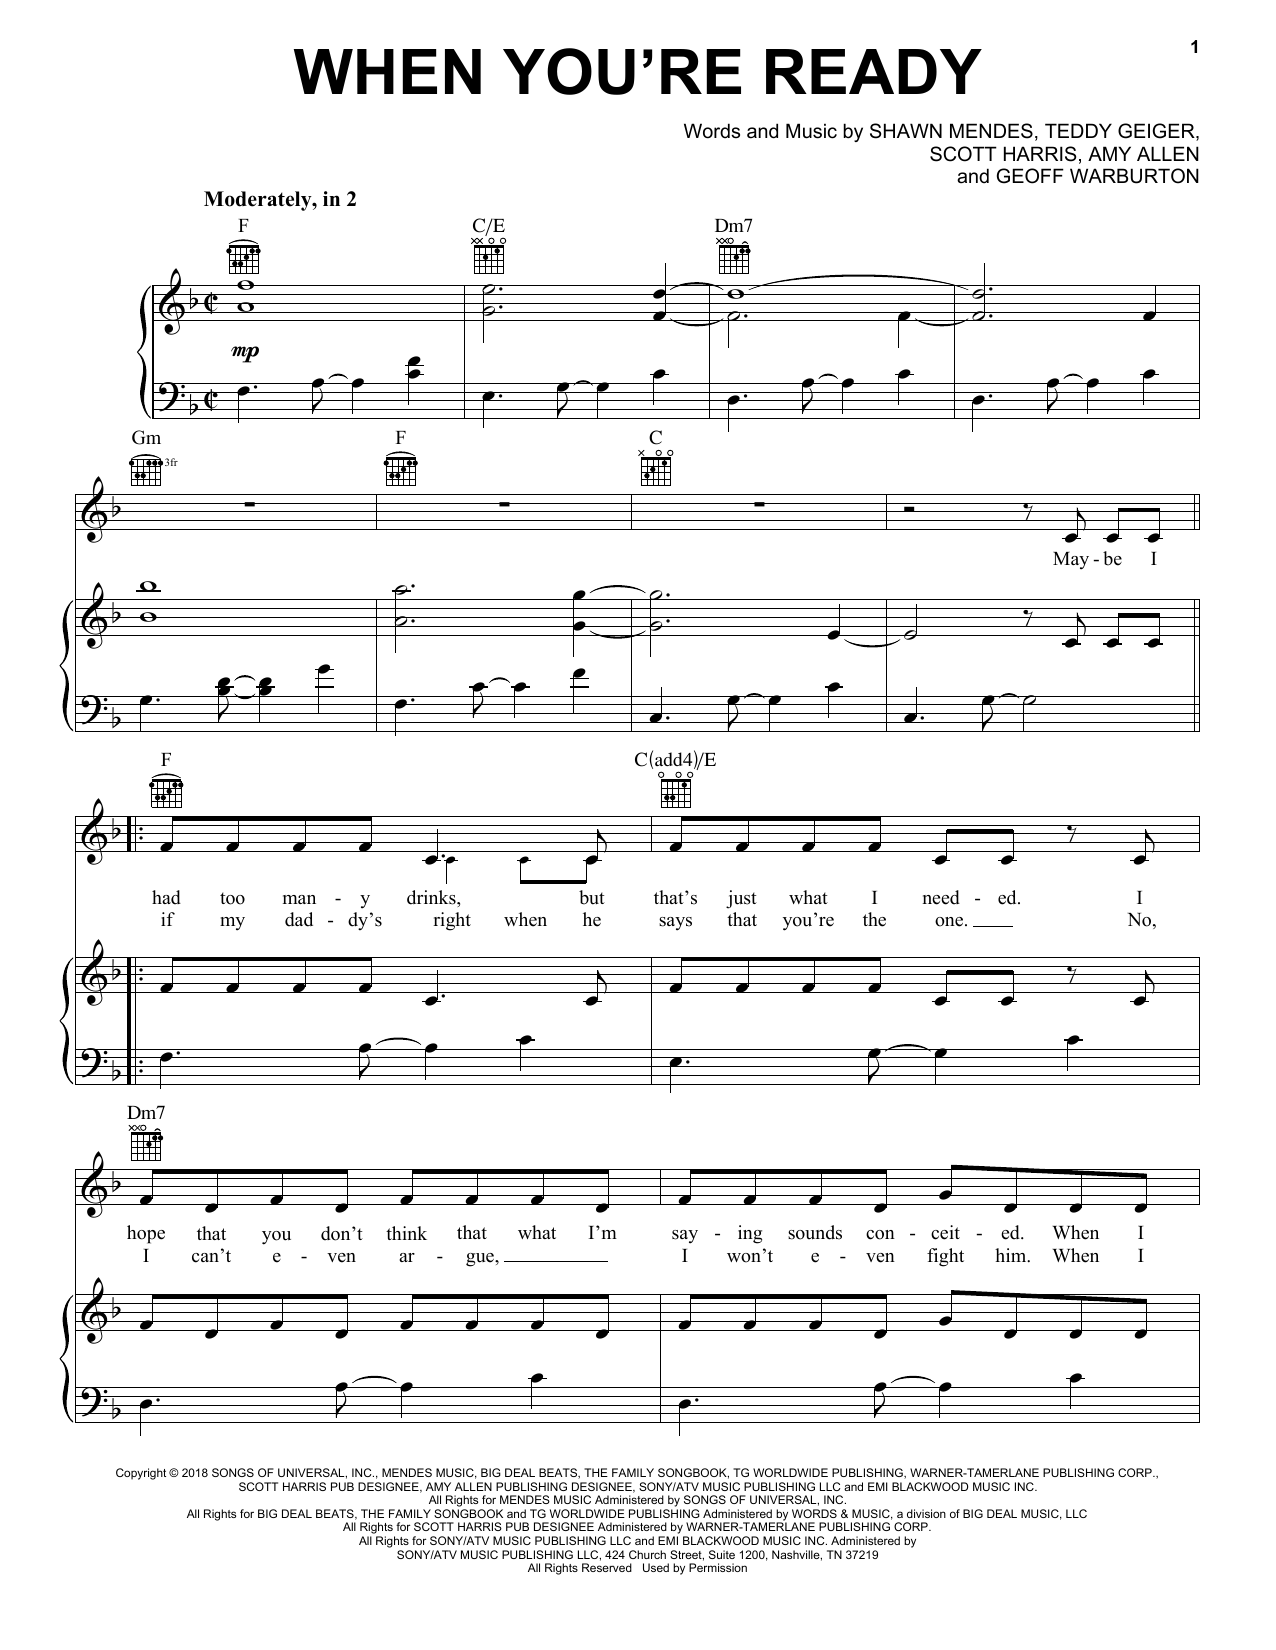 Download Shawn Mendes When You're Ready Sheet Music